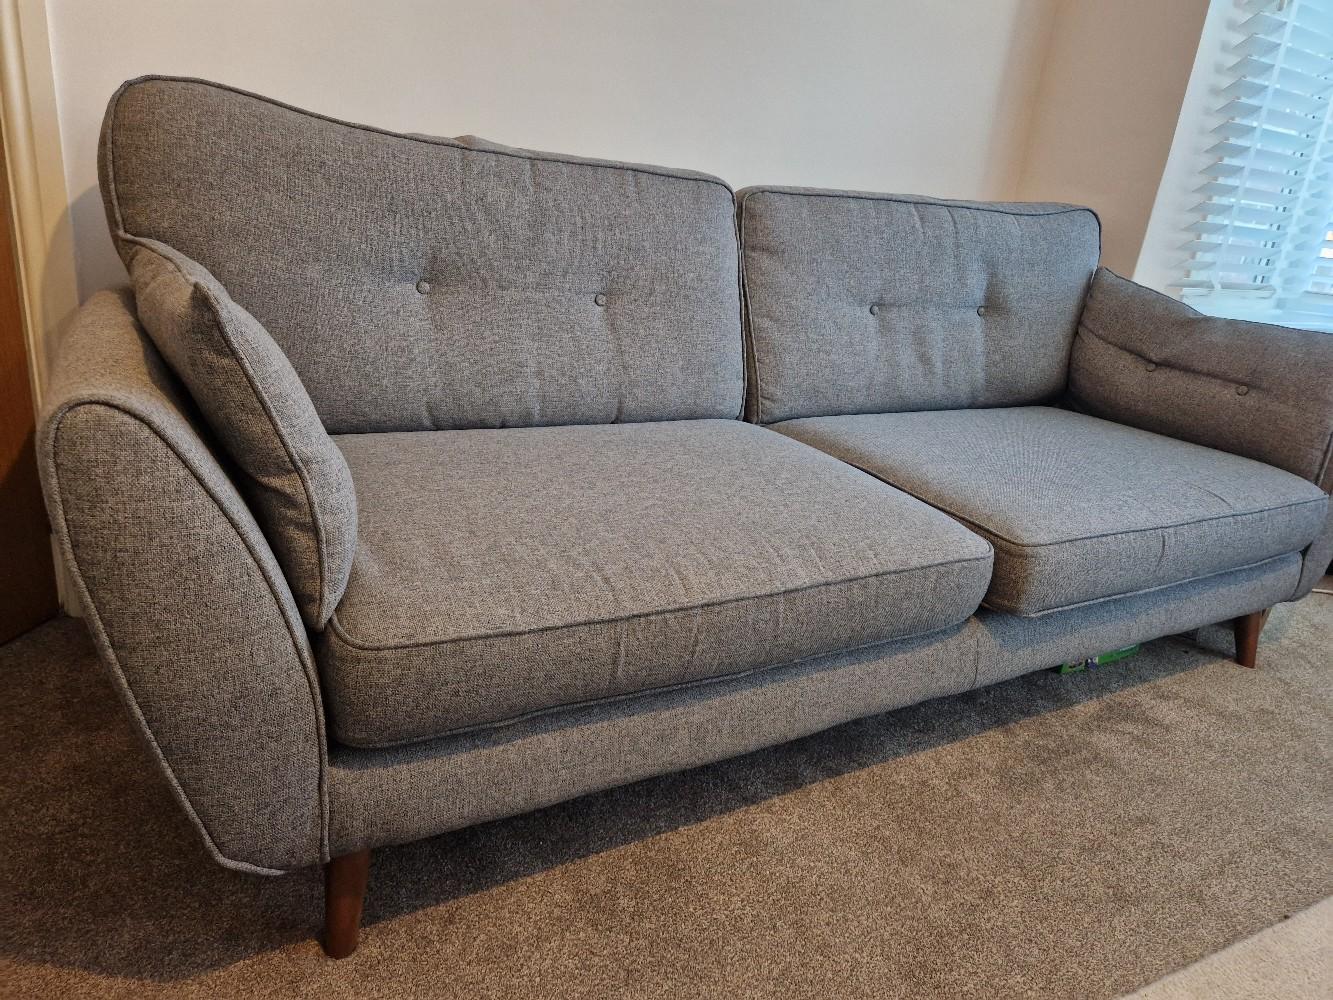 DFS – DFS Sofa collection – French Connection UK